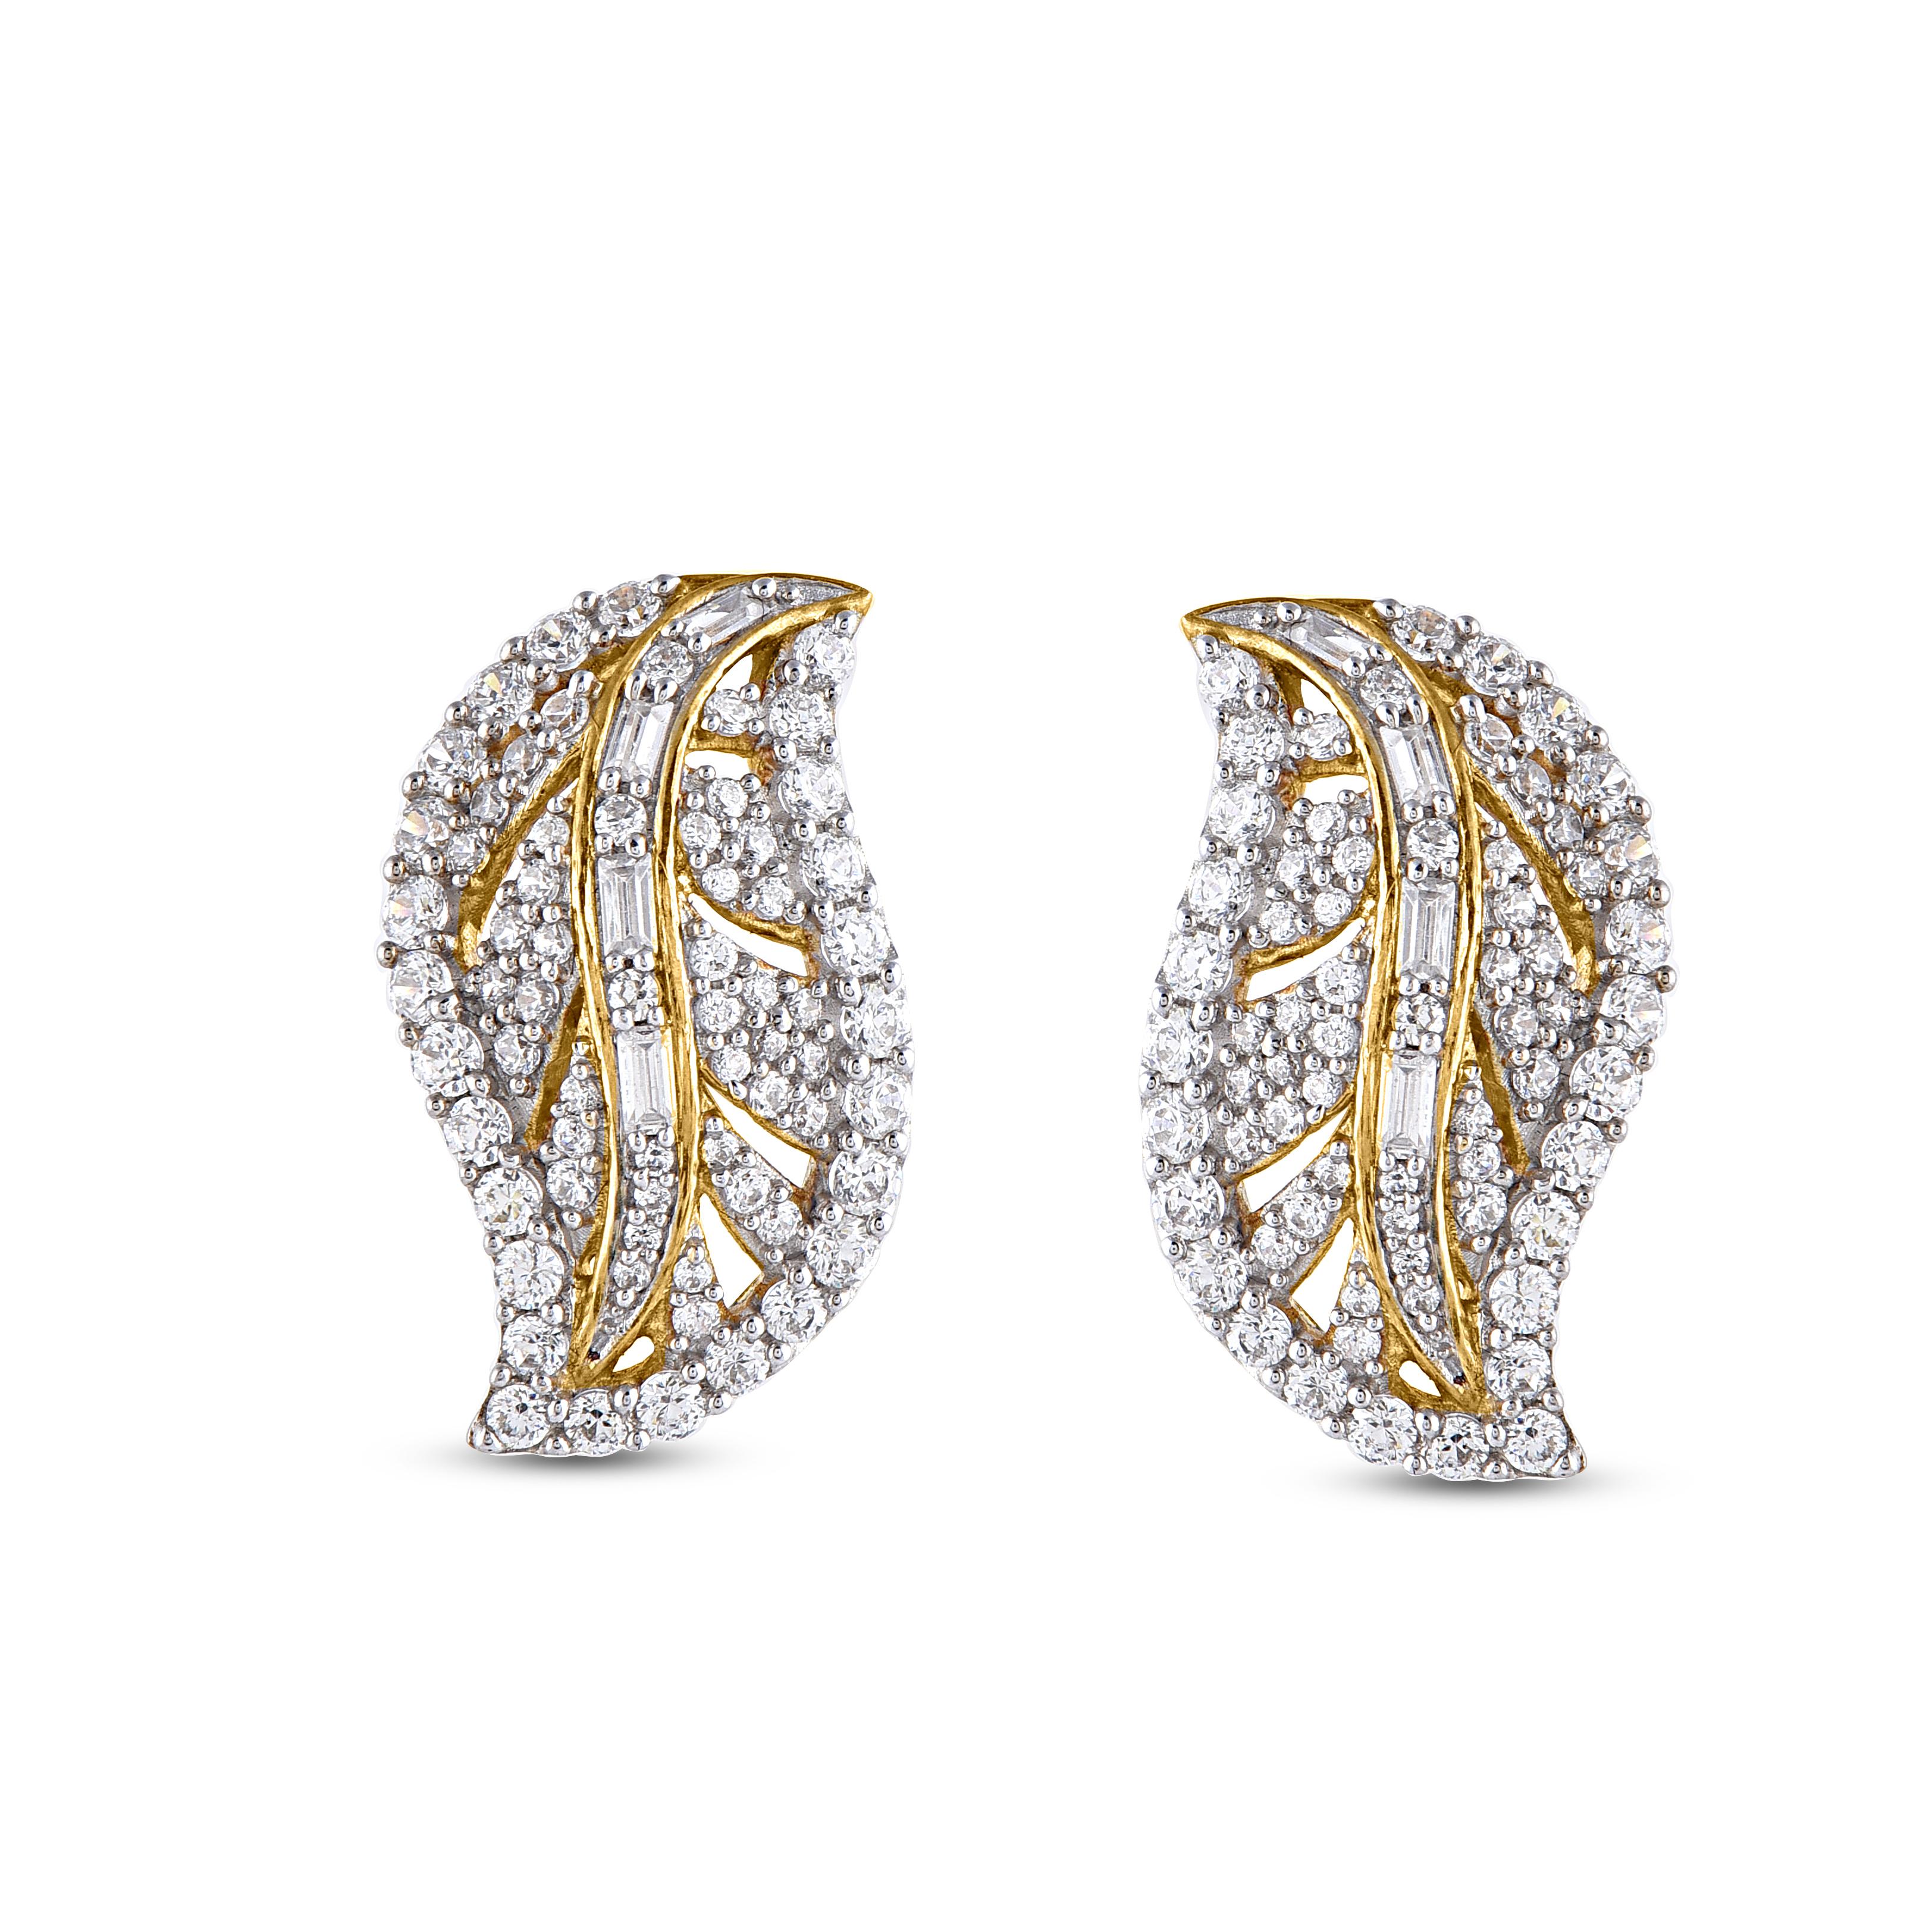 Simply chic, these diamond stud earrings fit any occasion with ease. With 1.50 carat srud earrings have 134 round and 8 baguette diamond set in prong and pave setting. These sparkling leaf shaped stud earrings secure comfortably with post backs.